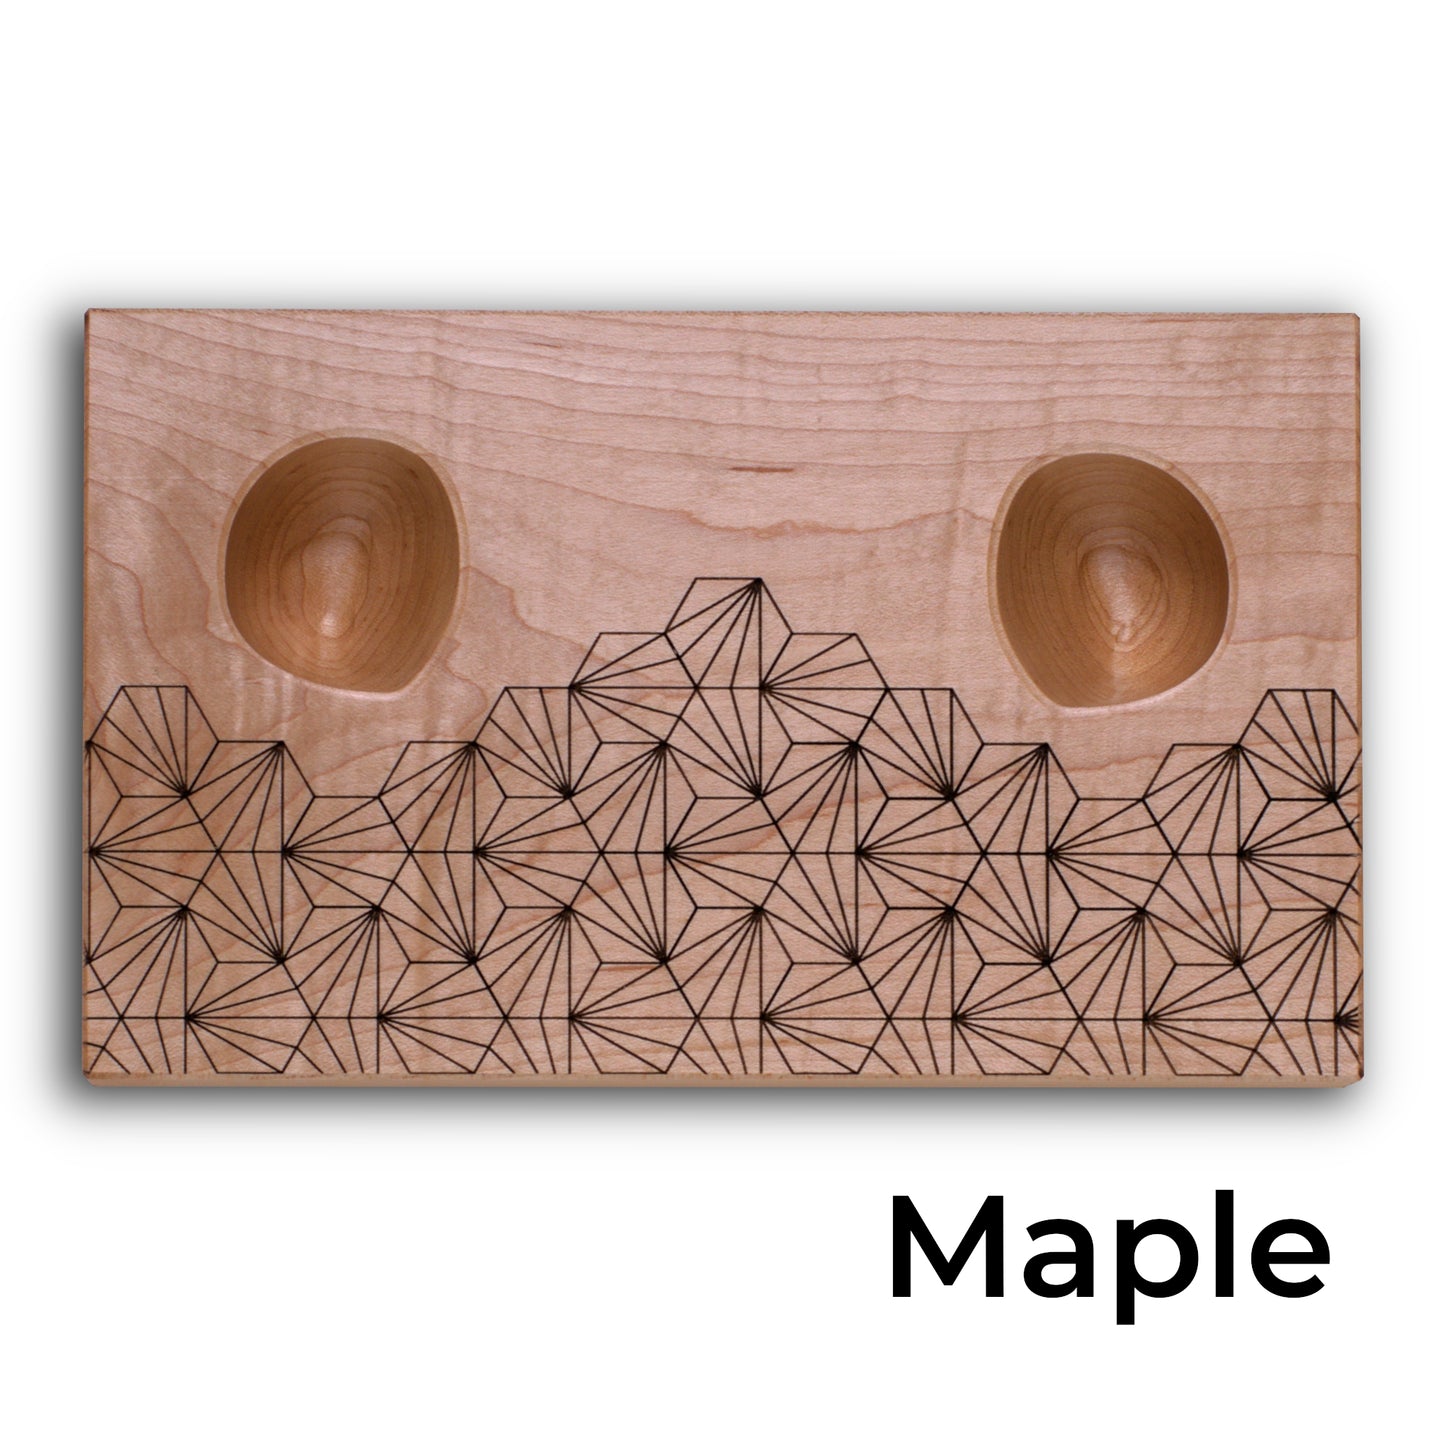 Wooden stand with geometric pattern in maple for Playstation 5 dualsense controller